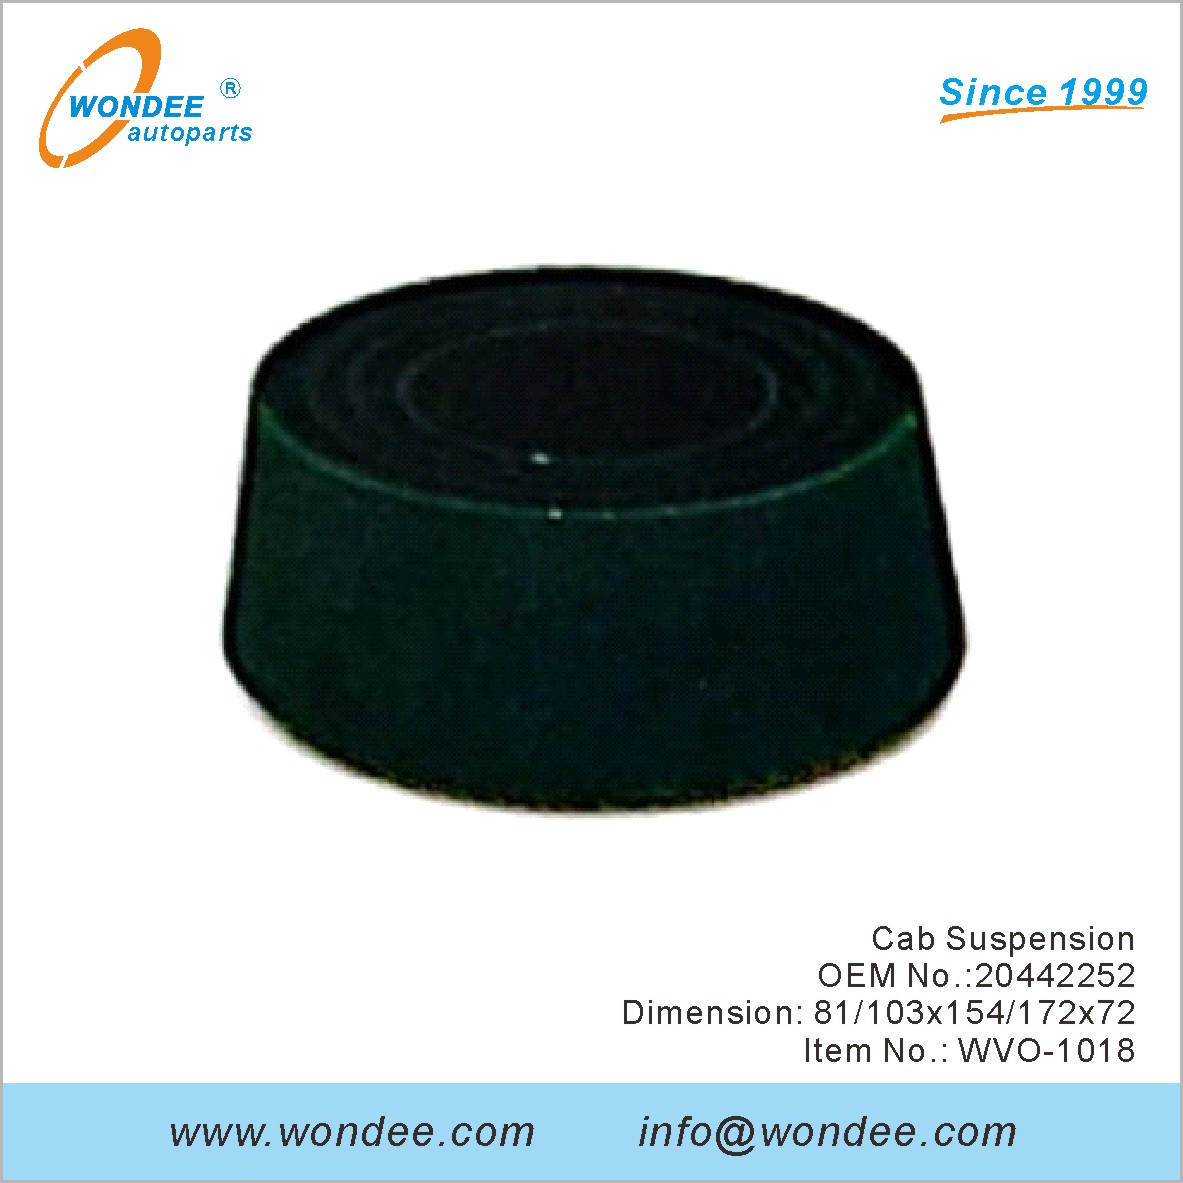 Cab Suspension OEM 20442252 for Volvo from WONDEE